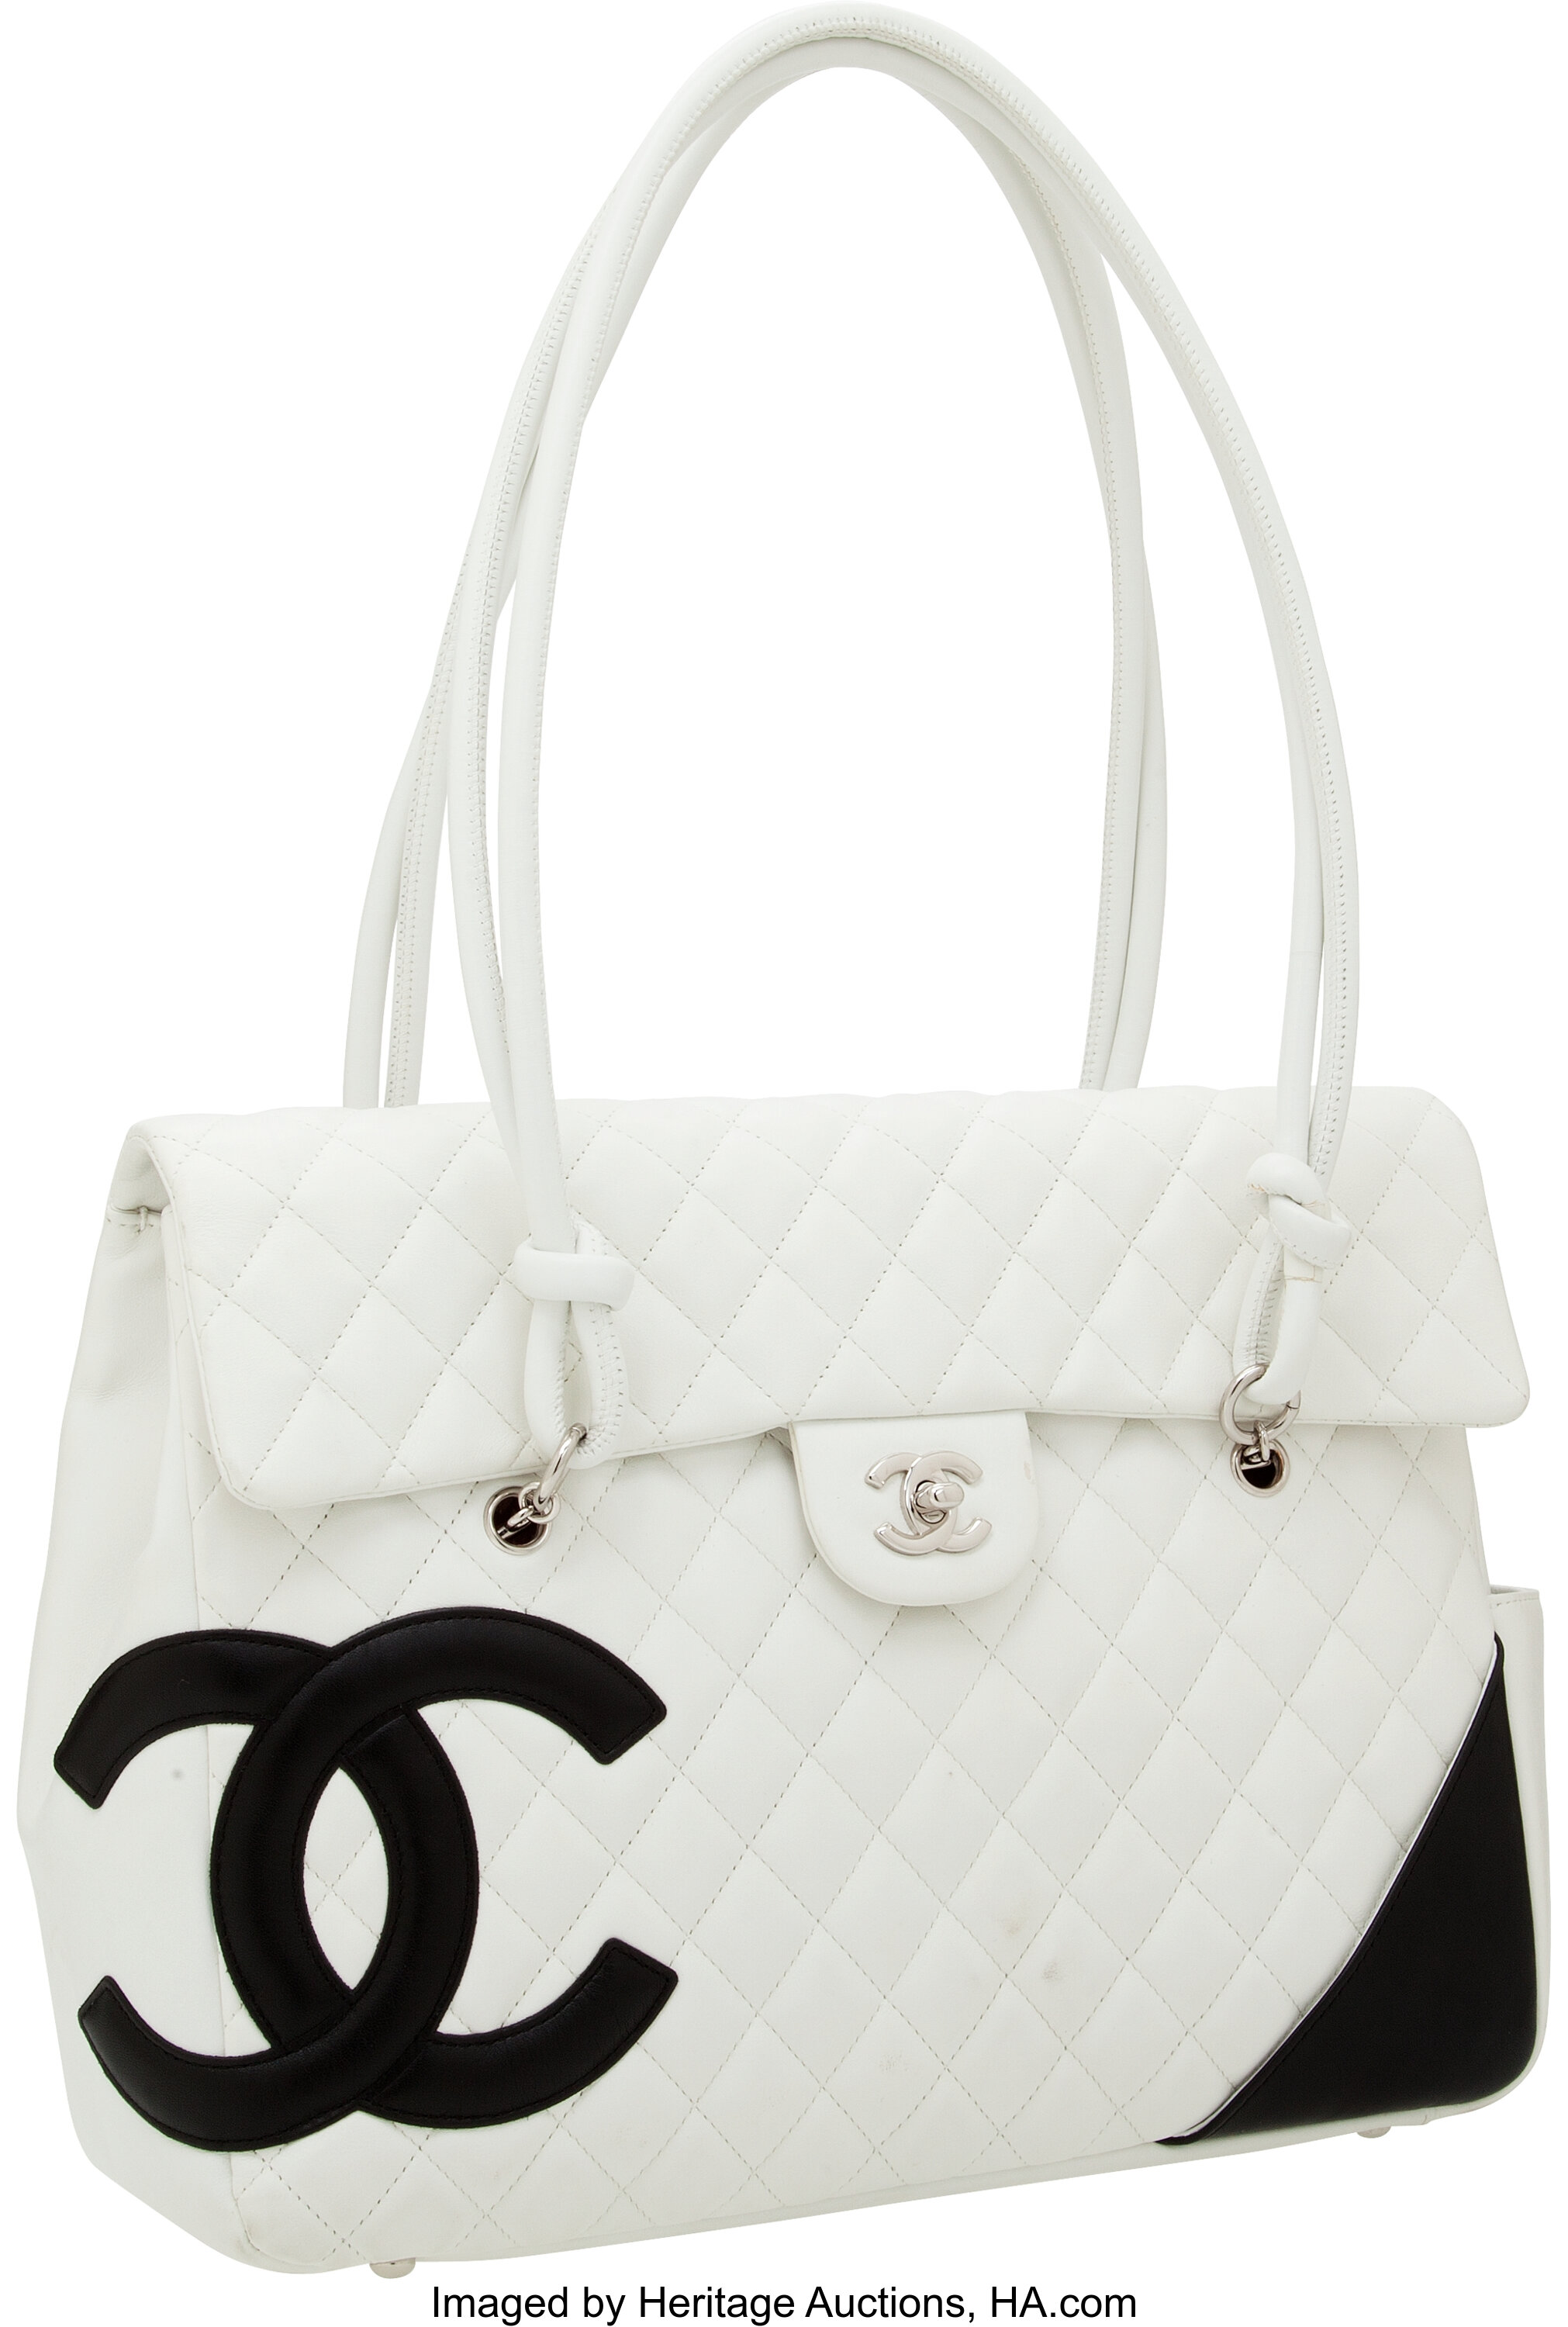 Chanel White Lambskin Leather Cambon Large Flap Bag.  Luxury